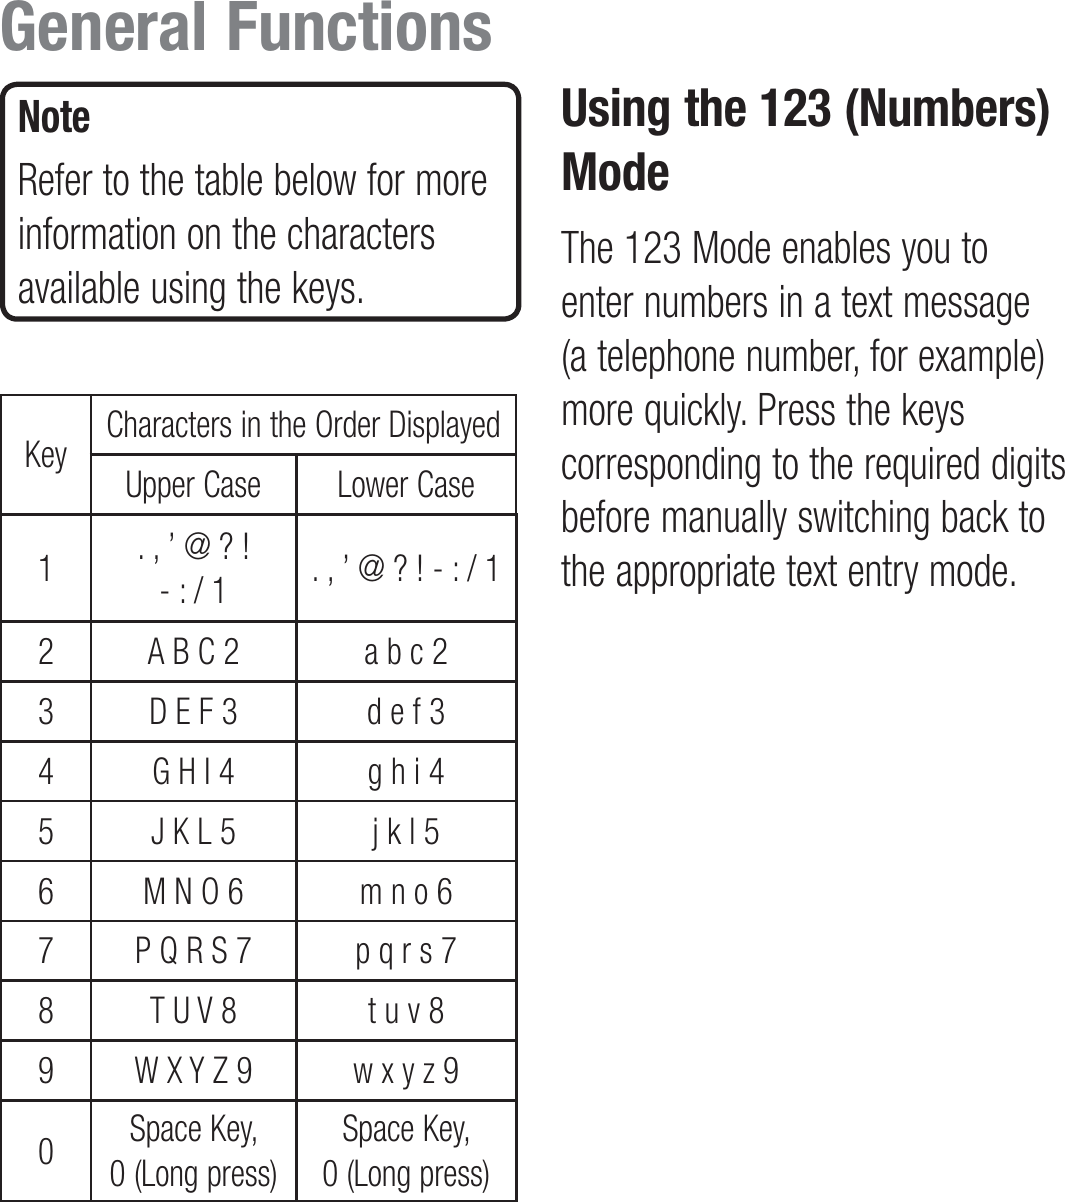 NoteRefer to the table below for more information on the characters available using the keys.Key Characters in the Order DisplayedUpper Case Lower Case1. , ’ @ ? ! - : / 1 . , ’ @ ? ! - : / 12 A B C 2 a b c 23 D E F 3 d e f 34 G H I 4 g h i 45 J K L 5 j k l 56 M N O 6 m n o 67 P Q R S 7 p q r s 78 T U V 8 t u v 89 W X Y Z 9 w x y z 90Space Key,  0 (Long press)Space Key,  0 (Long press)Using the 123 (Numbers) ModeThe 123 Mode enables you to enter numbers in a text message (a telephone number, for example) more quickly. Press the keys corresponding to the required digits before manually switching back to the appropriate text entry mode.General Functions